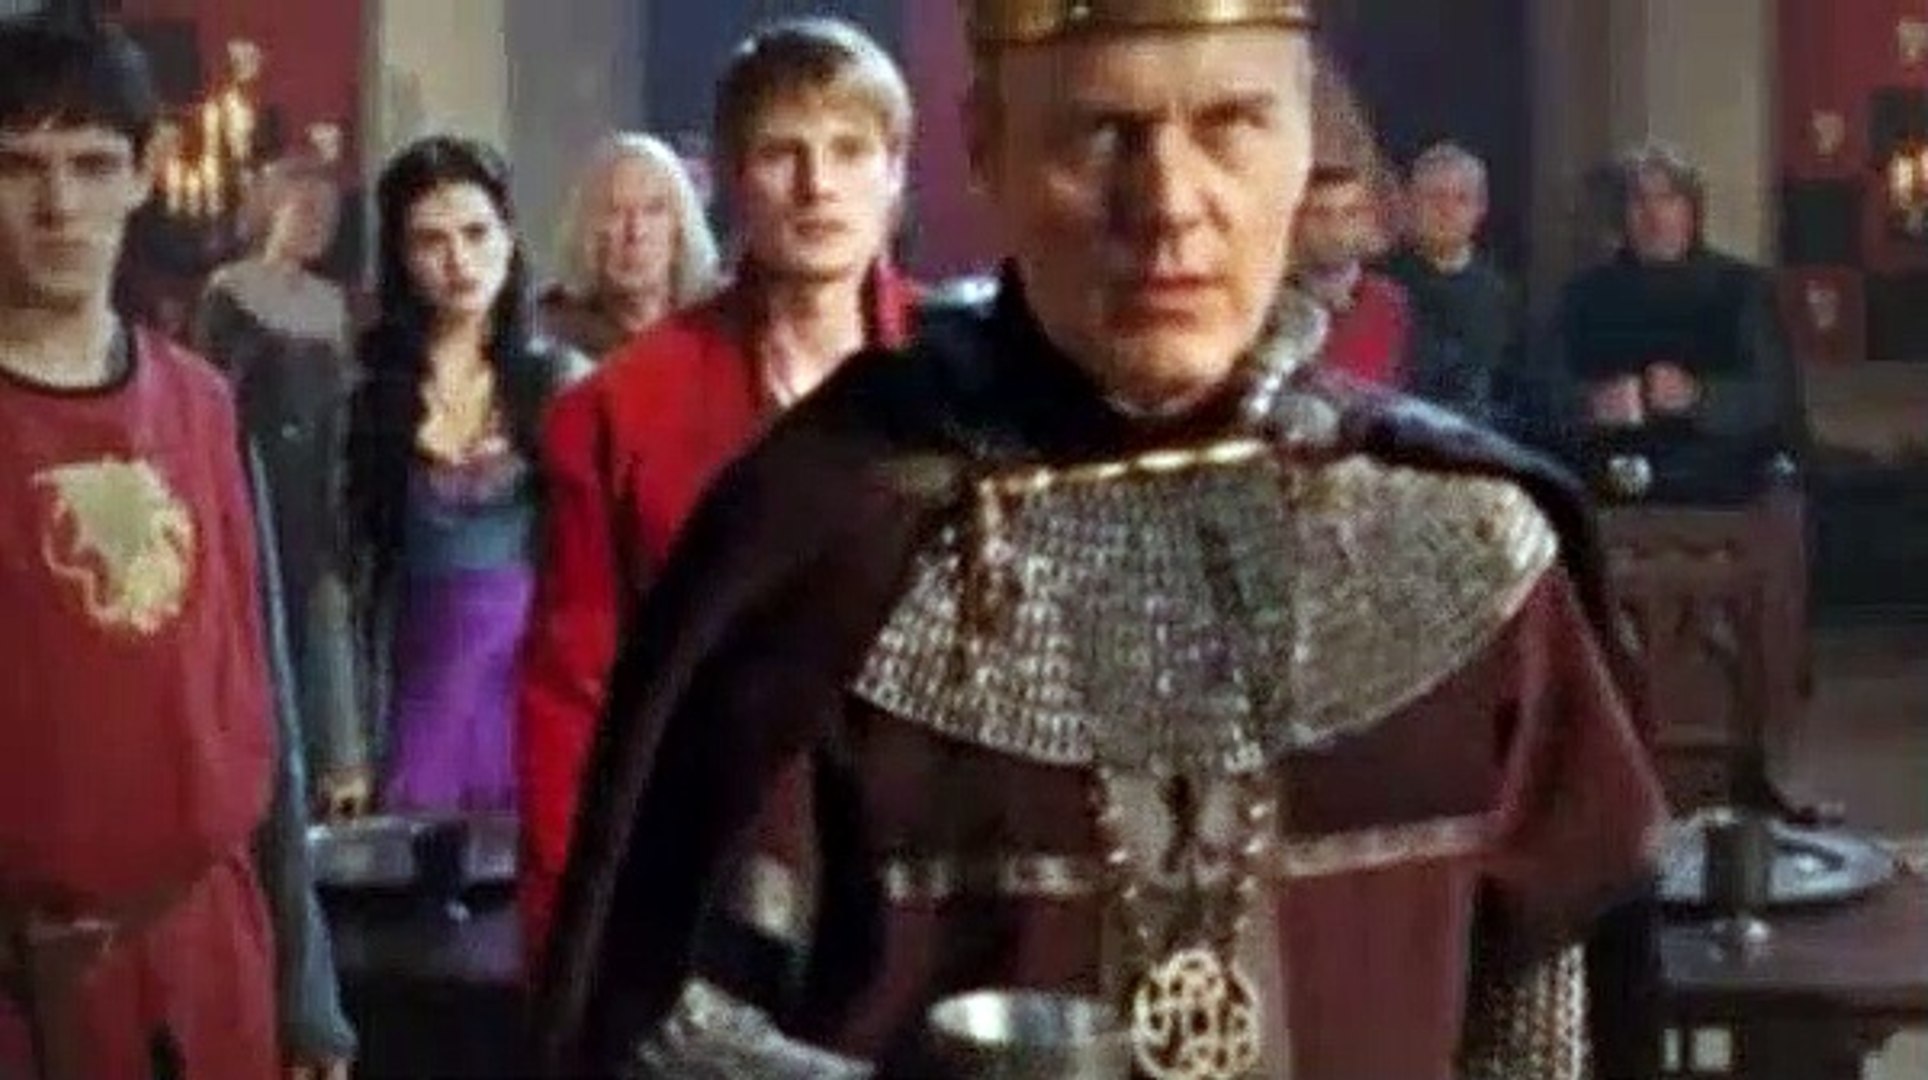 Merlin S01E04 The Poisoned Chalice - video Dailymotion